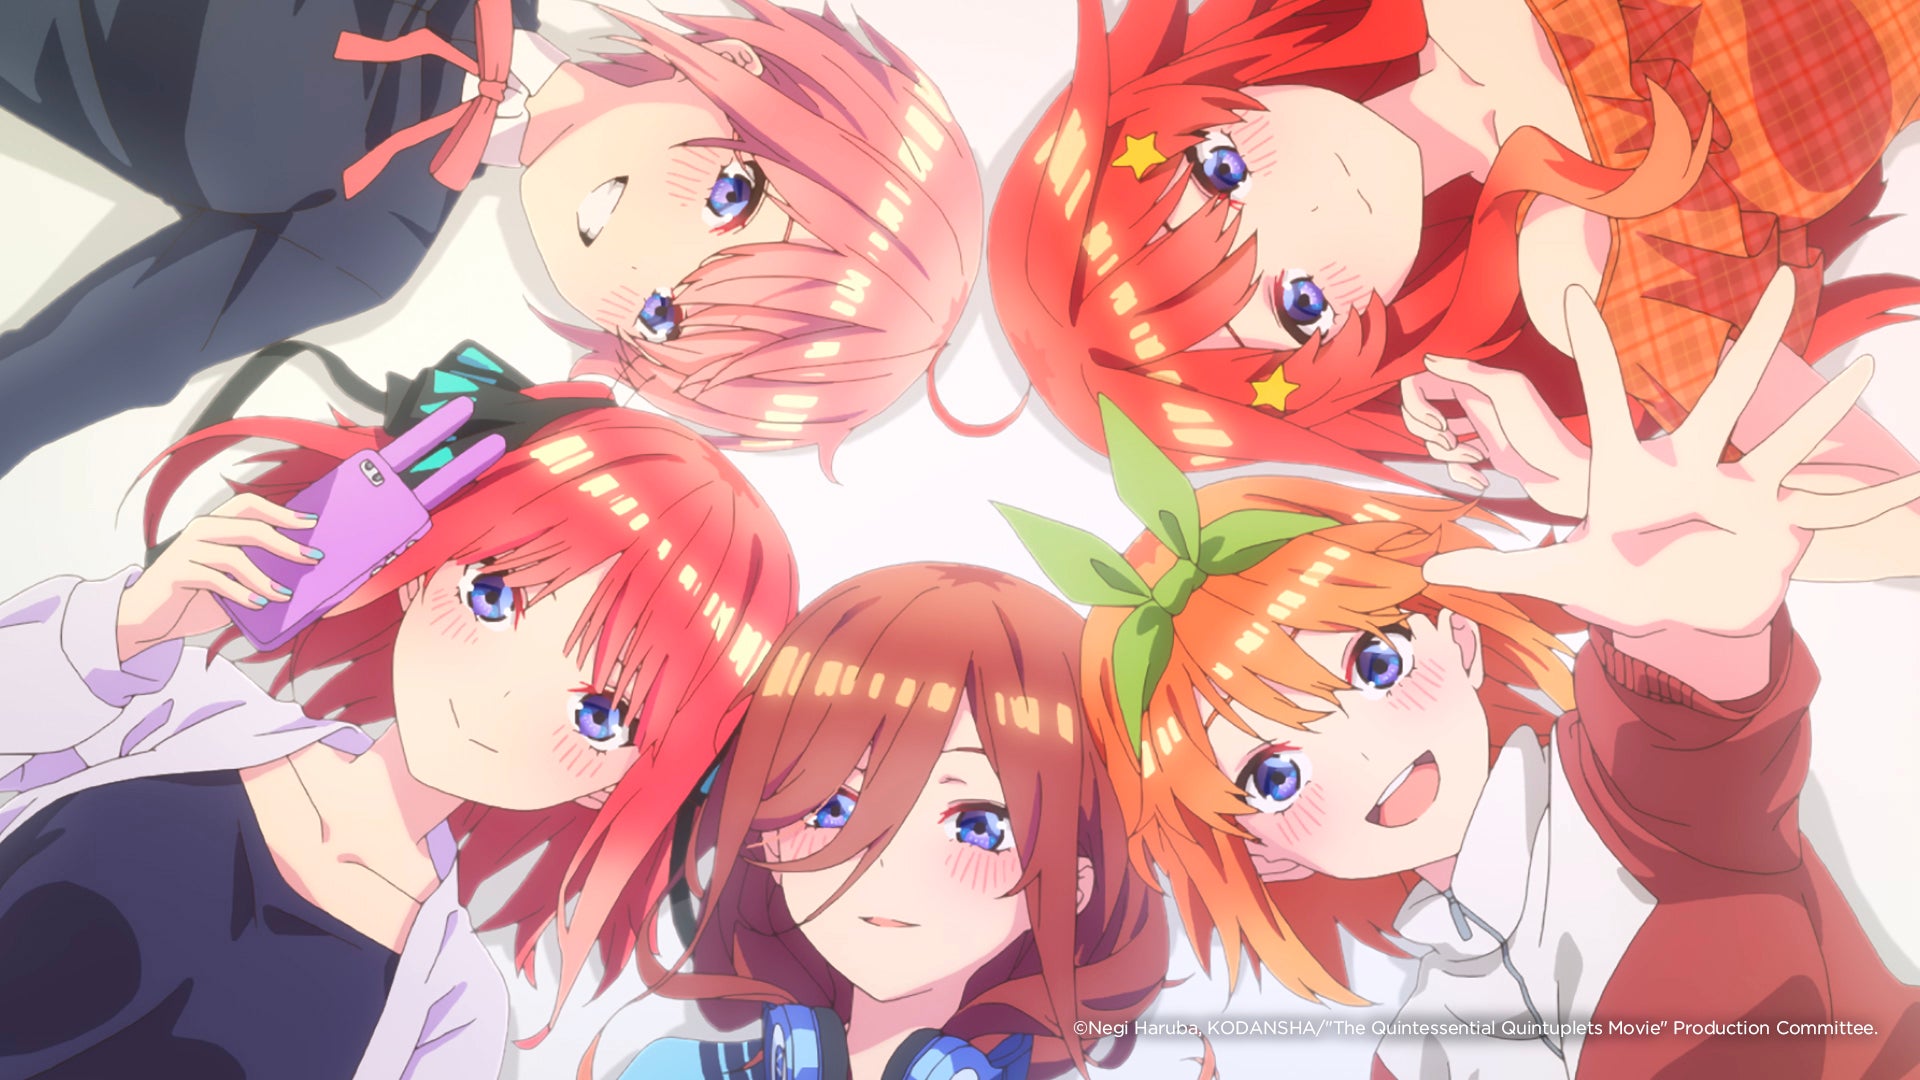 Where to Watch  Stream The Quintessential Quintuplets Movie